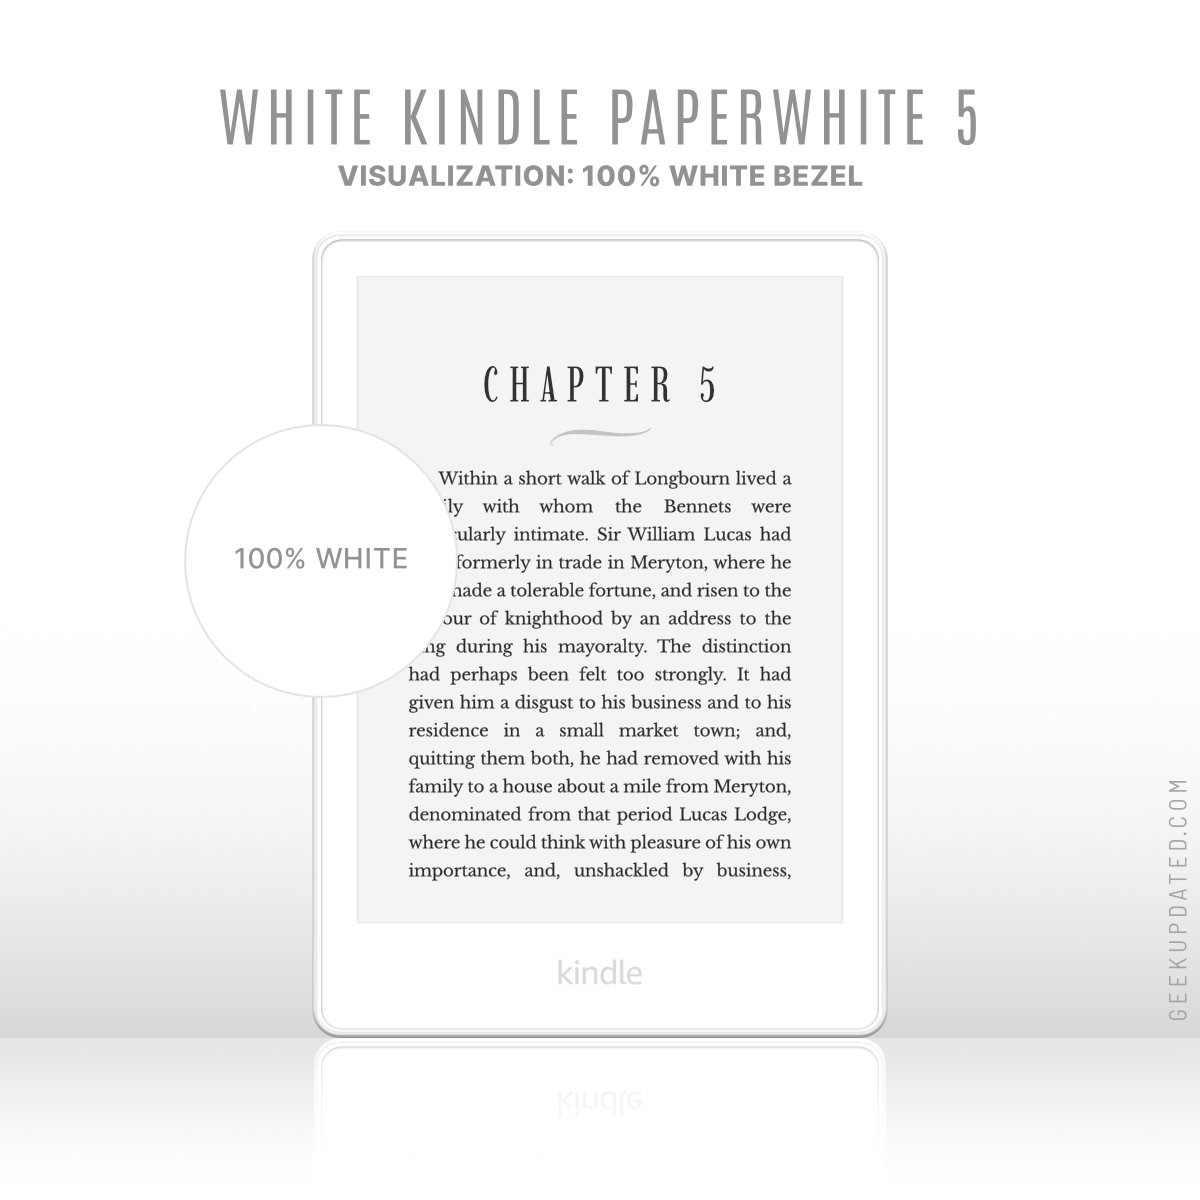 White Kindle Paperwhite 5 – will we see it at all?